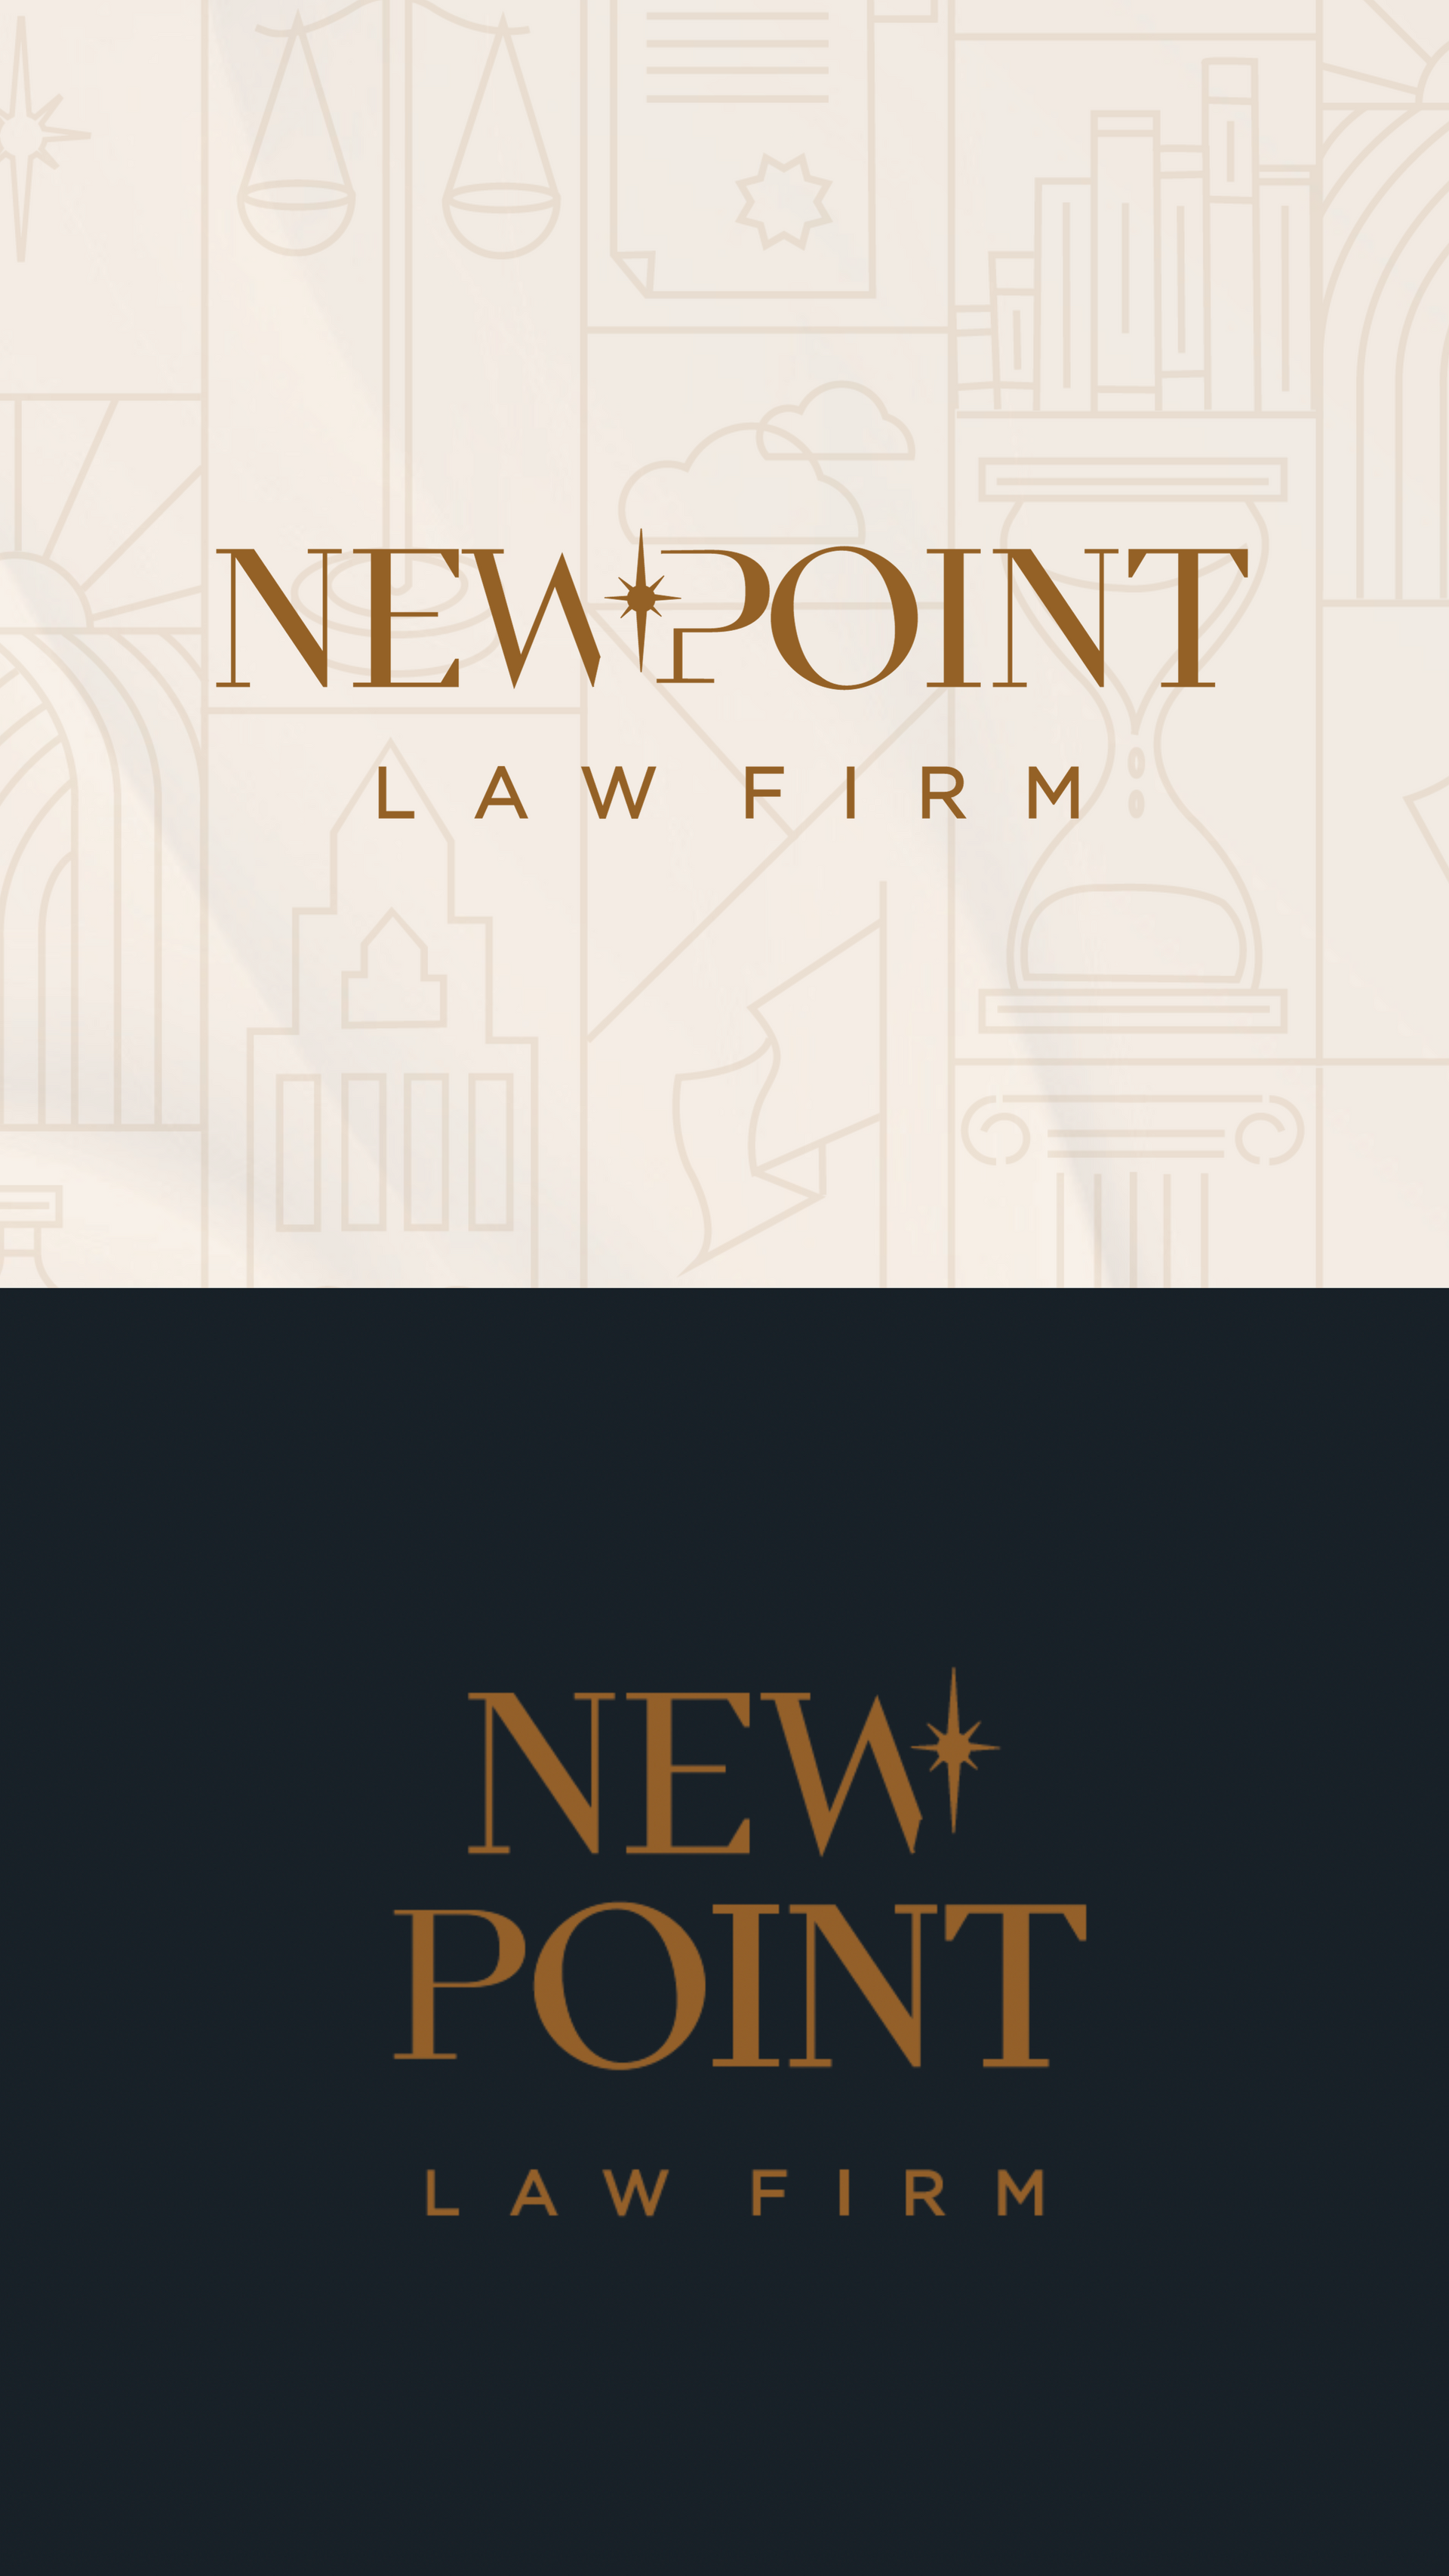 A logo for a law firm called new point law firm.